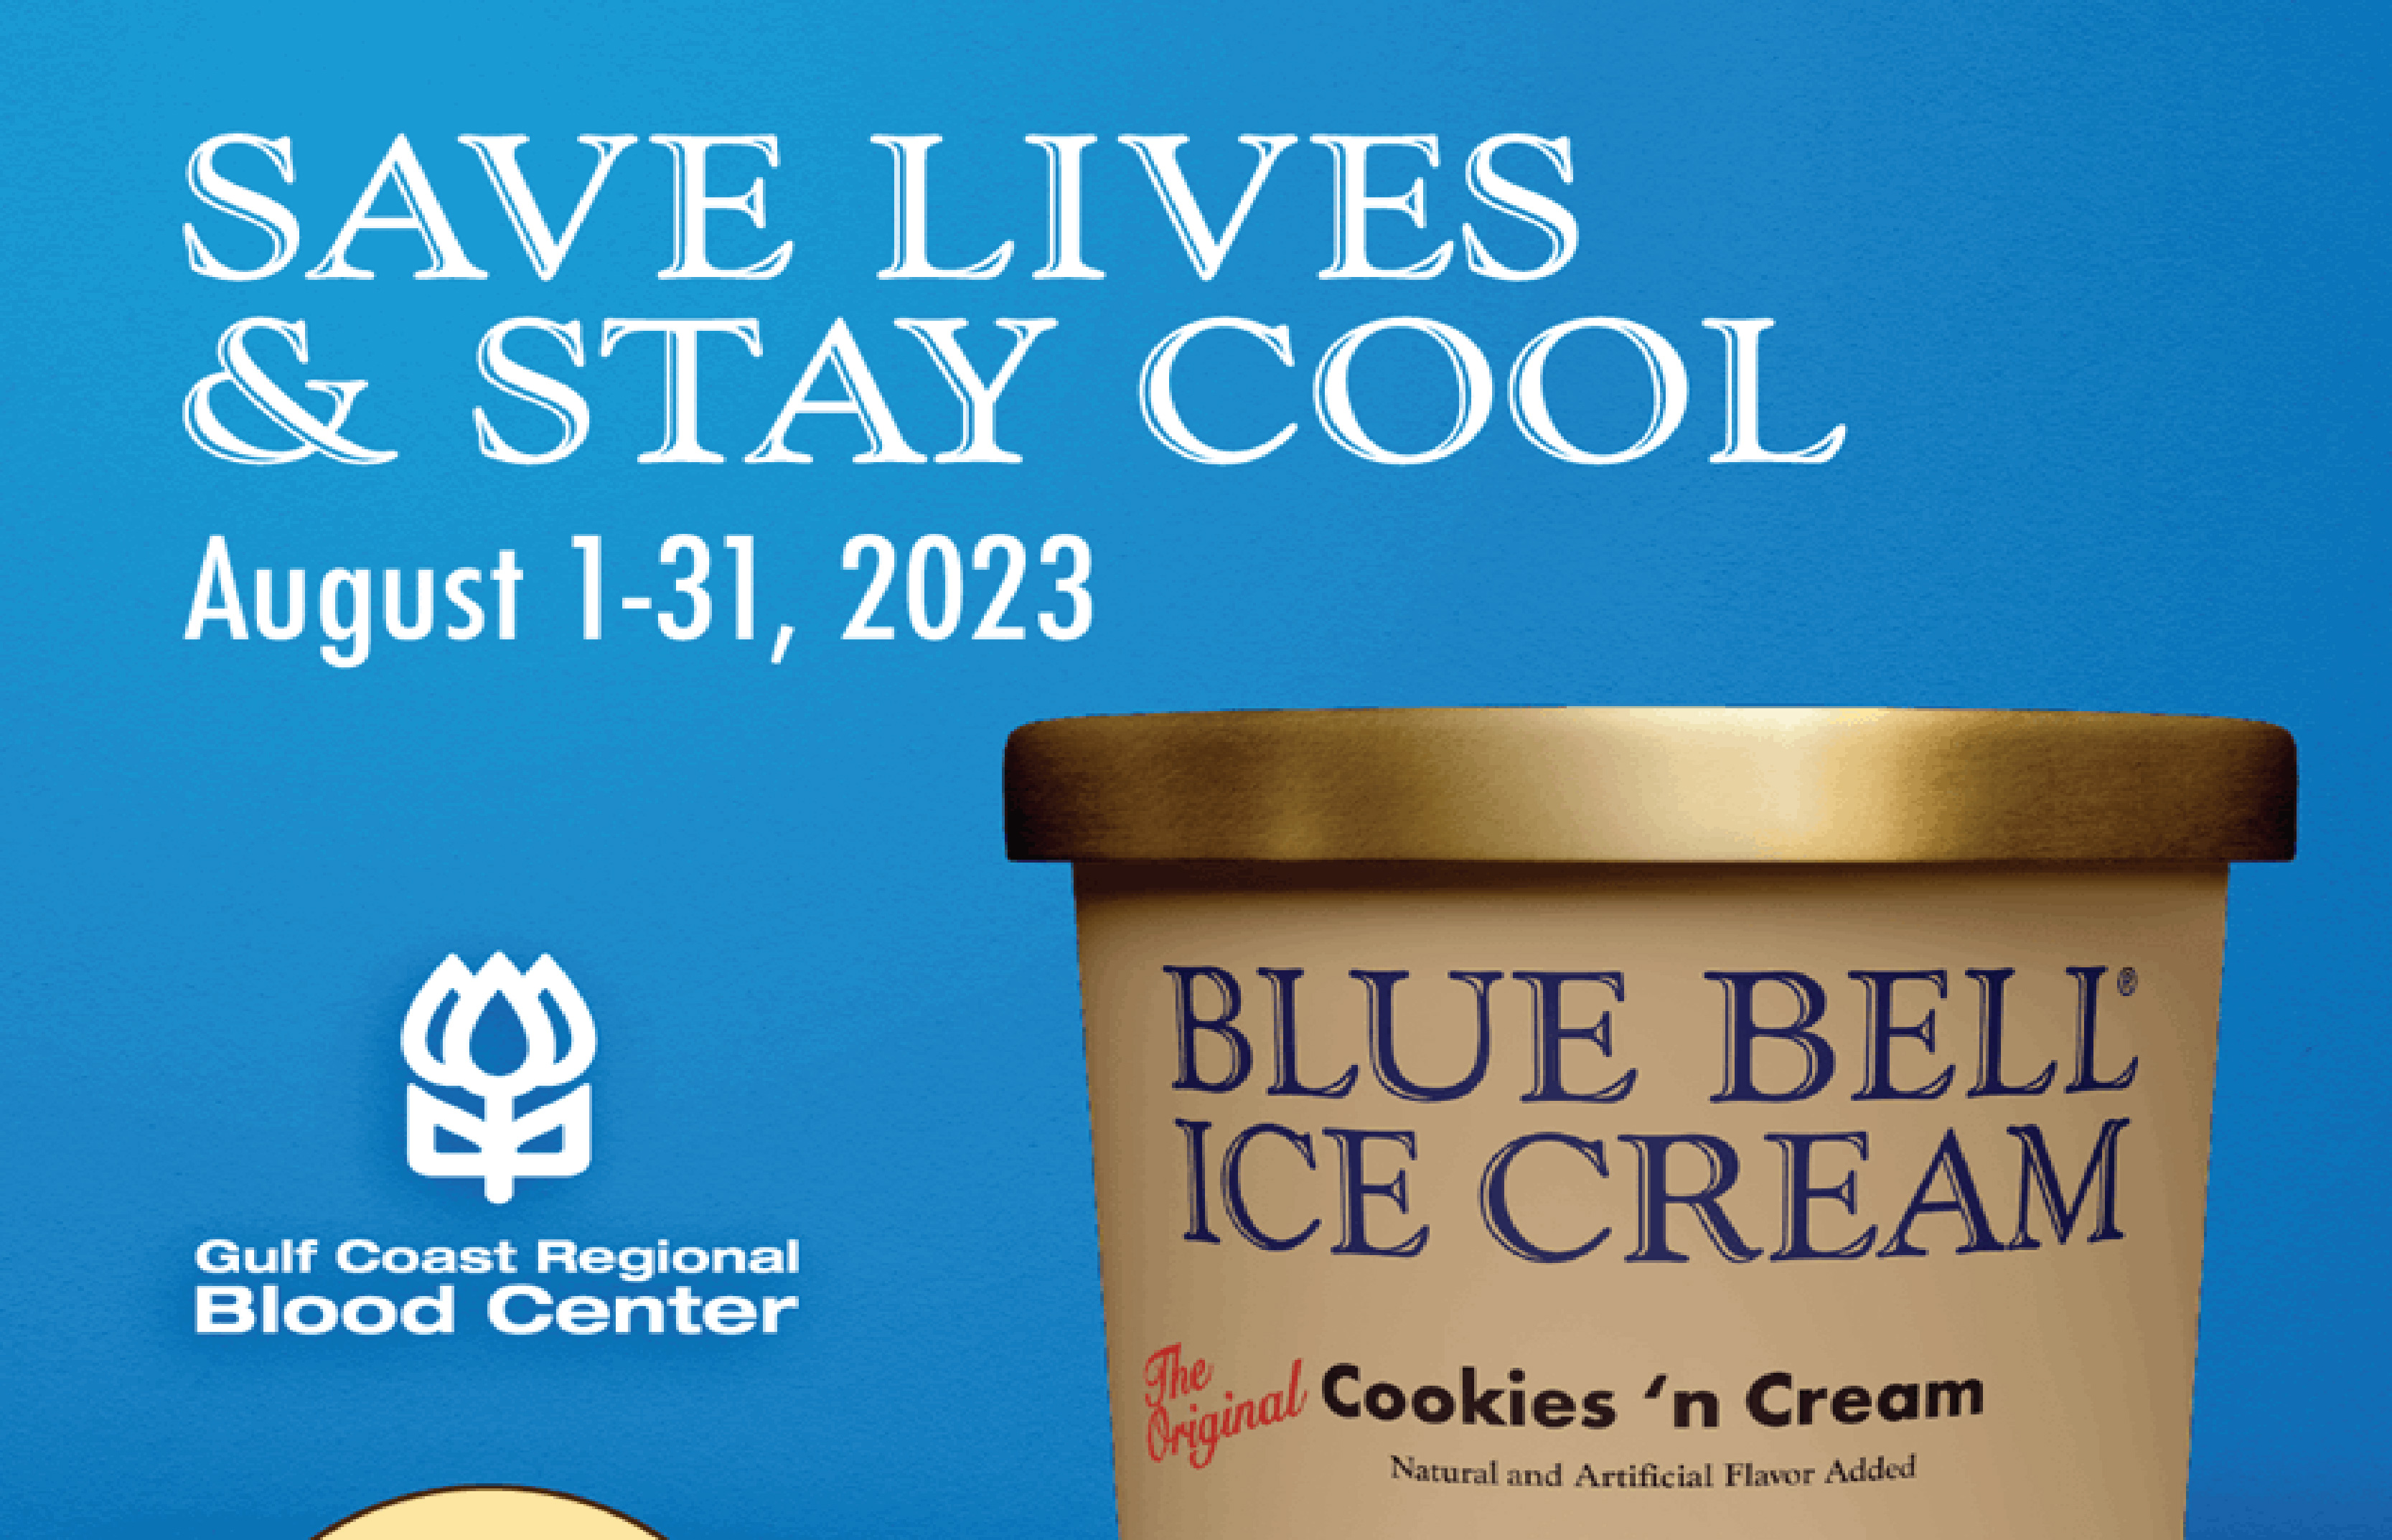 Donate Blood and Receive Free Blue Bell Ice Cream This Month